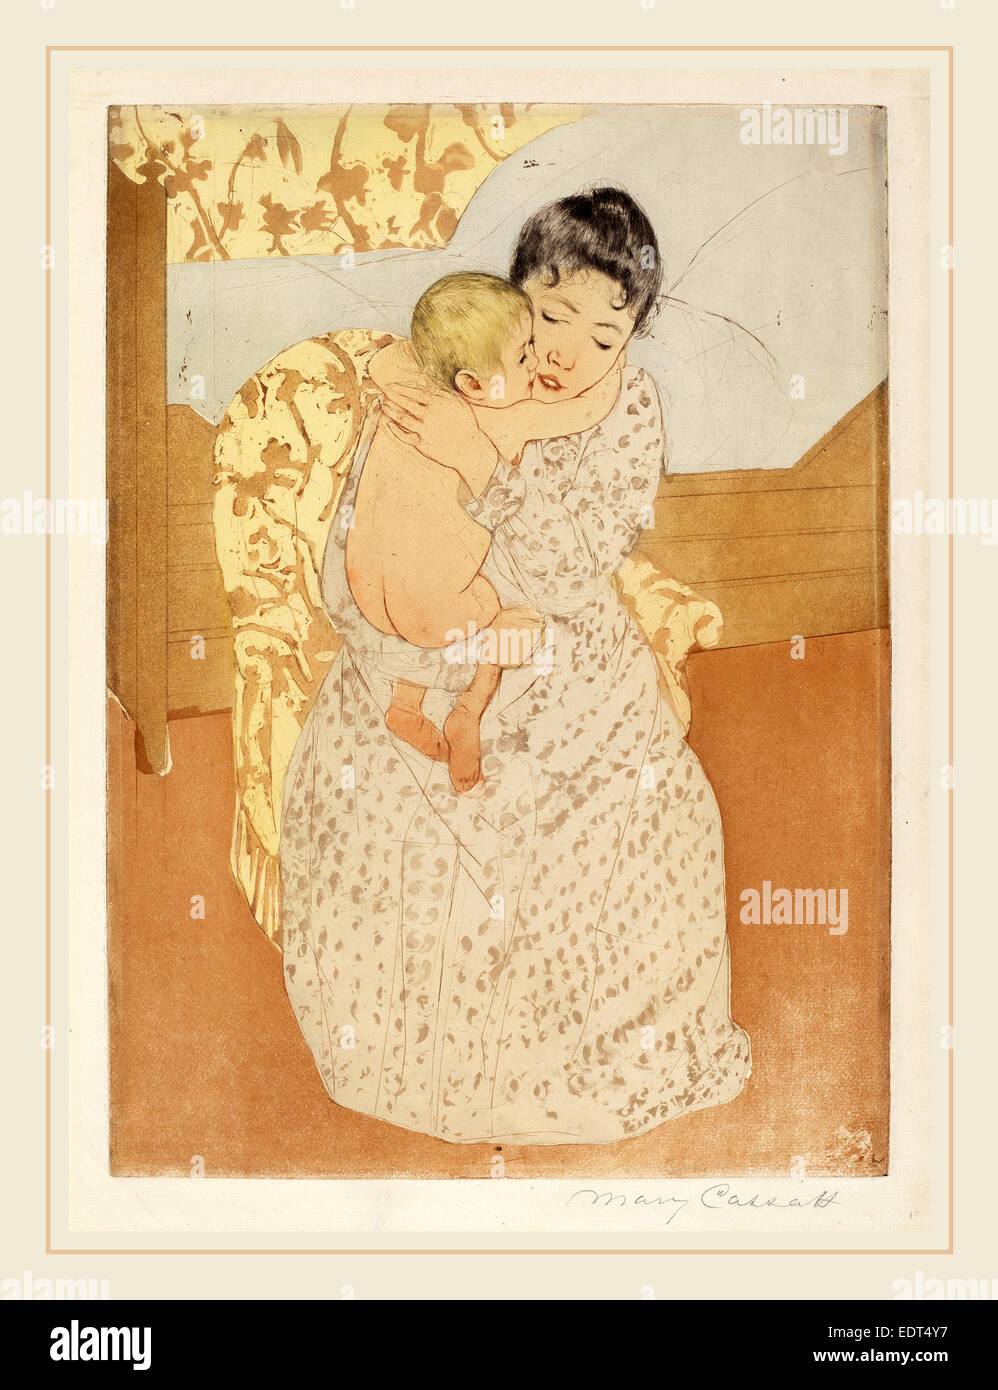 Mary Cassatt, Maternal Caress, American, 1844-1926, c. 1891, color drypoint and soft-ground etching on cream wove paper Stock Photo